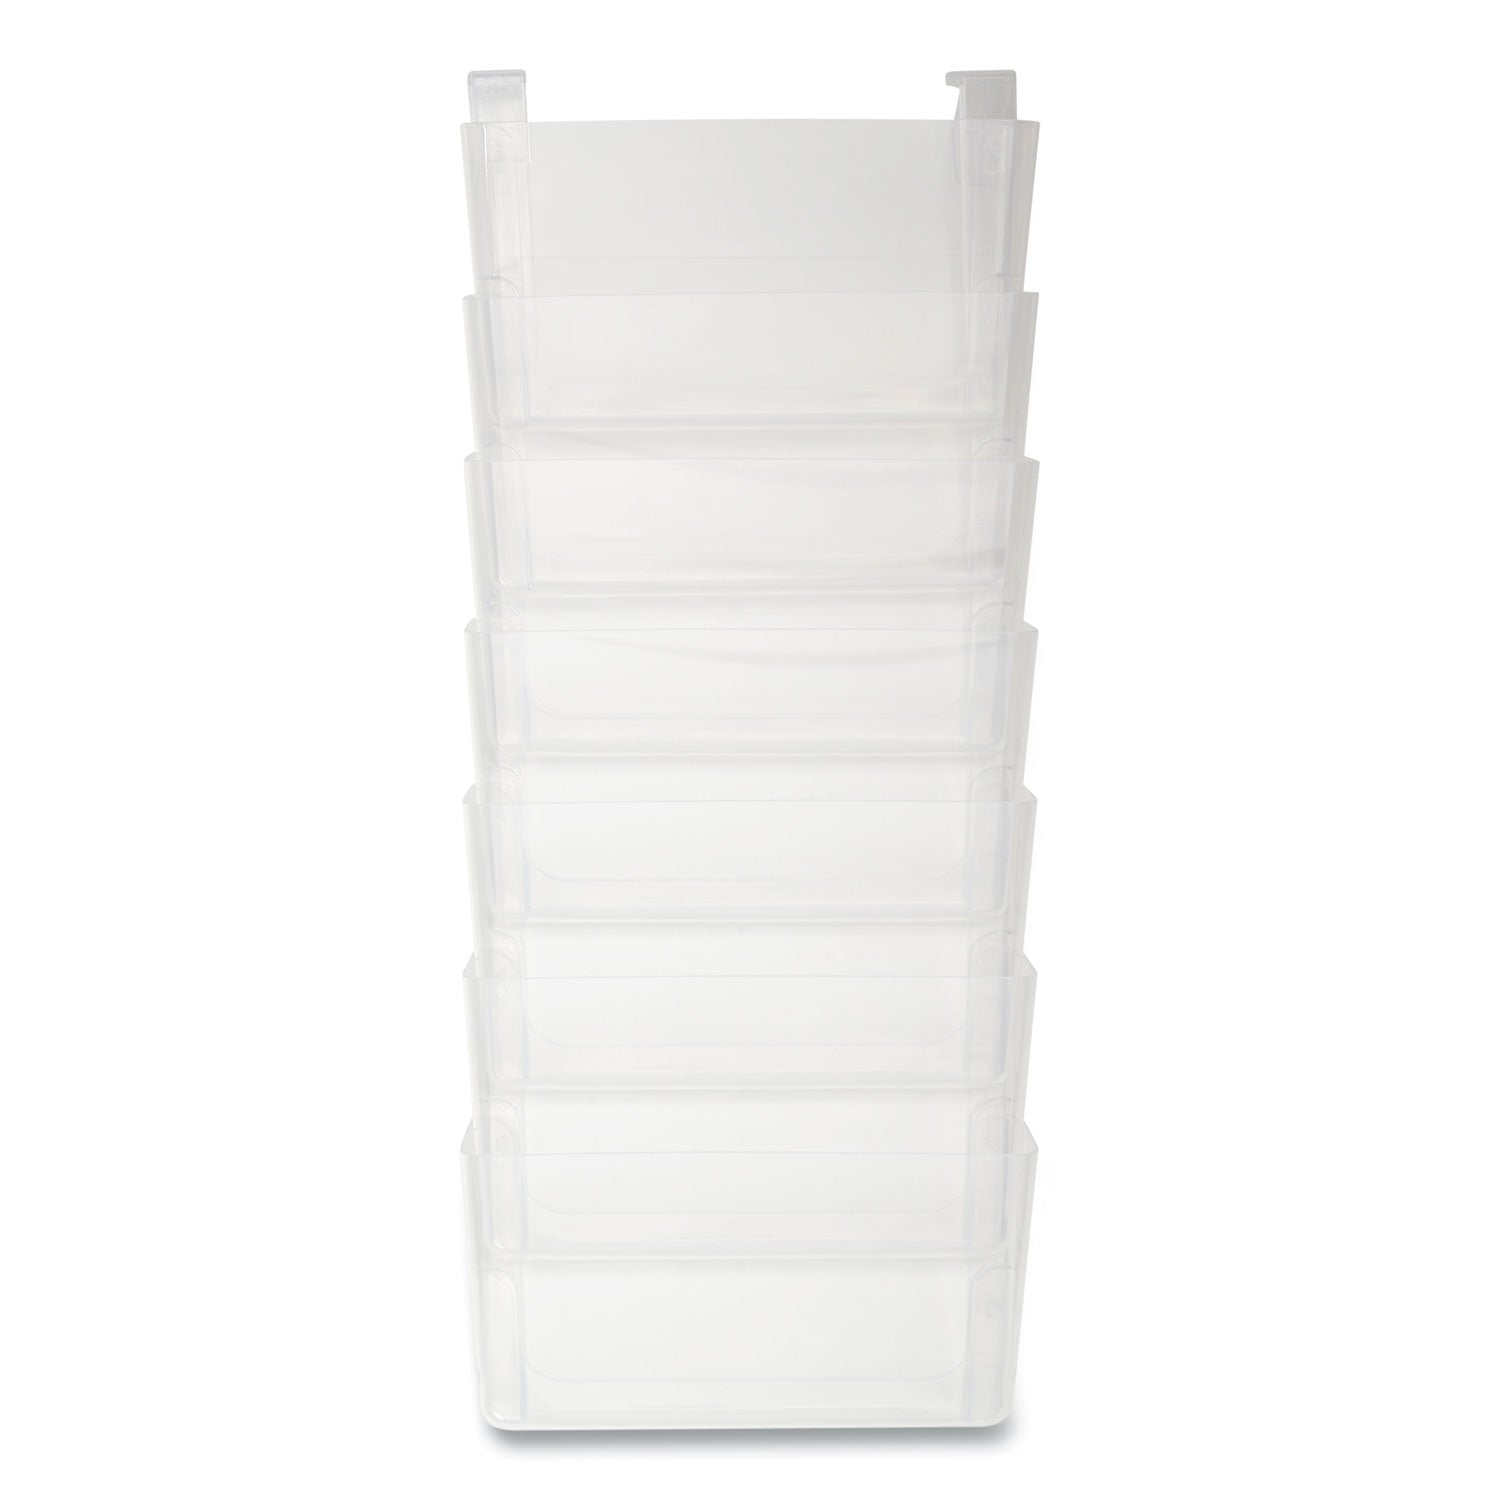 unbreakable-plastic-wall-file-7-sections-letter-size-13-x-381-x-3078-clear_tud24380812 - 1